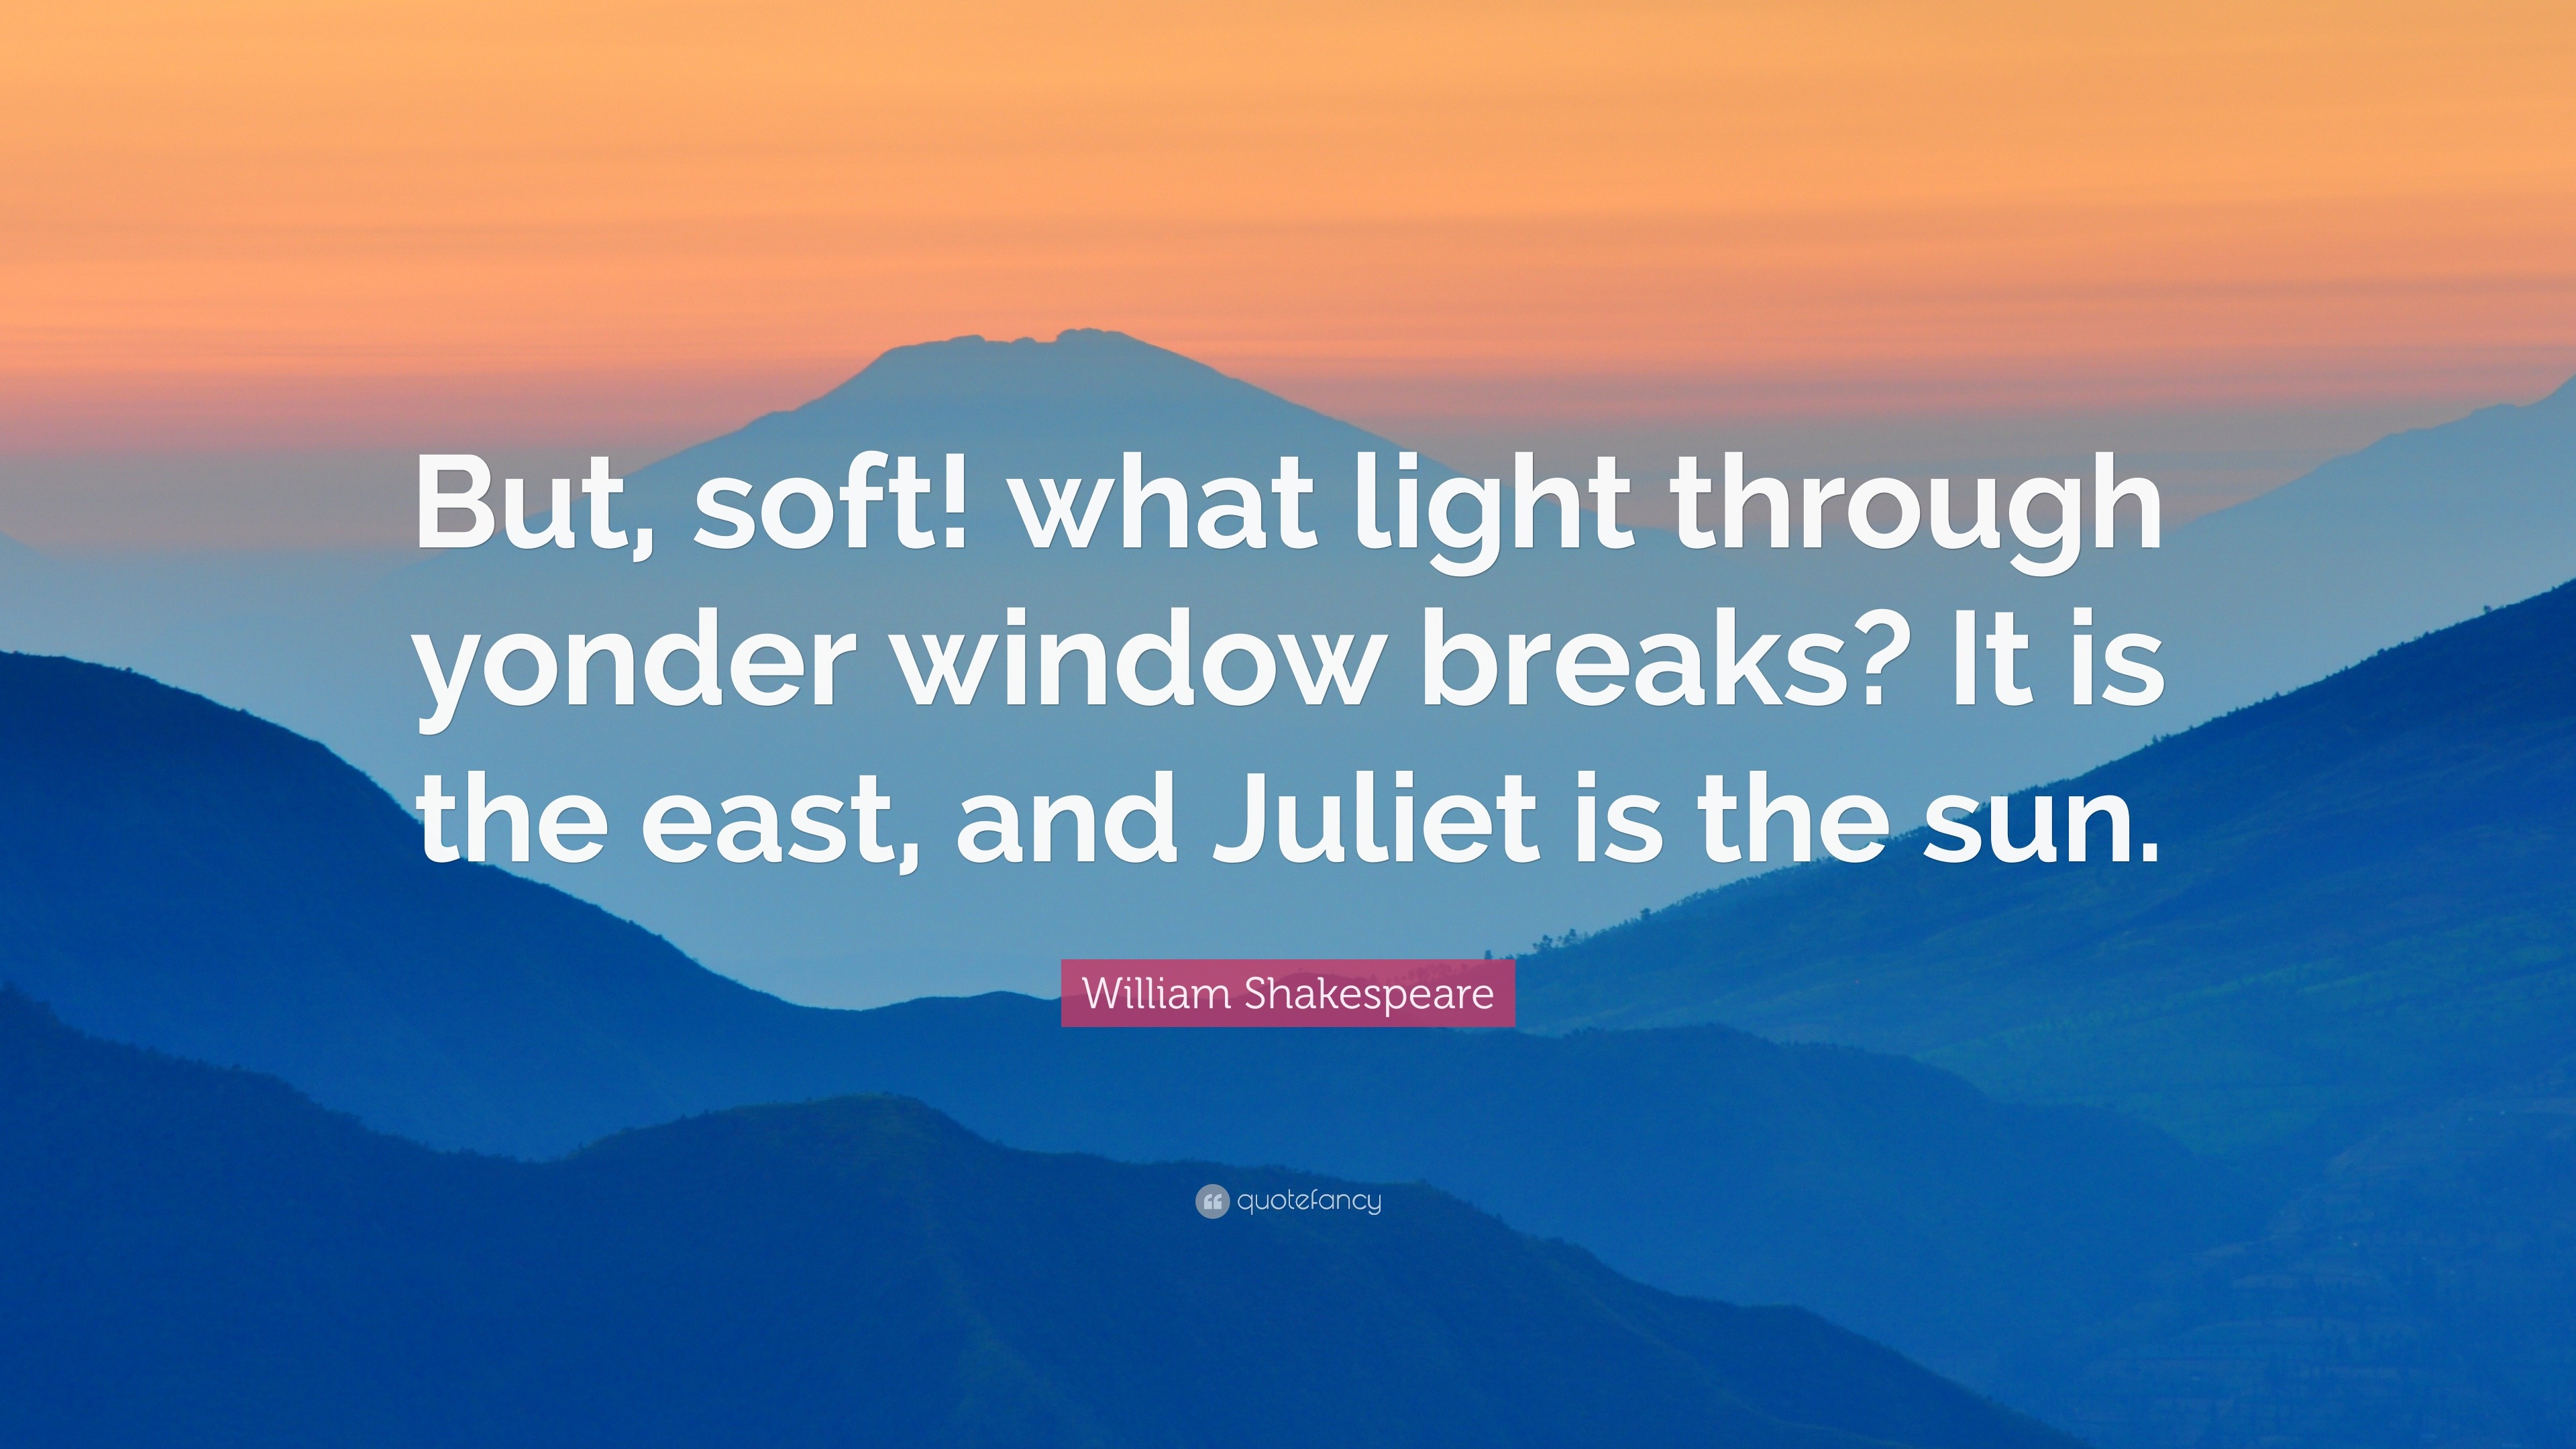 William Shakespeare Quote: soft! what light through yonder window breaks? It is the east, and